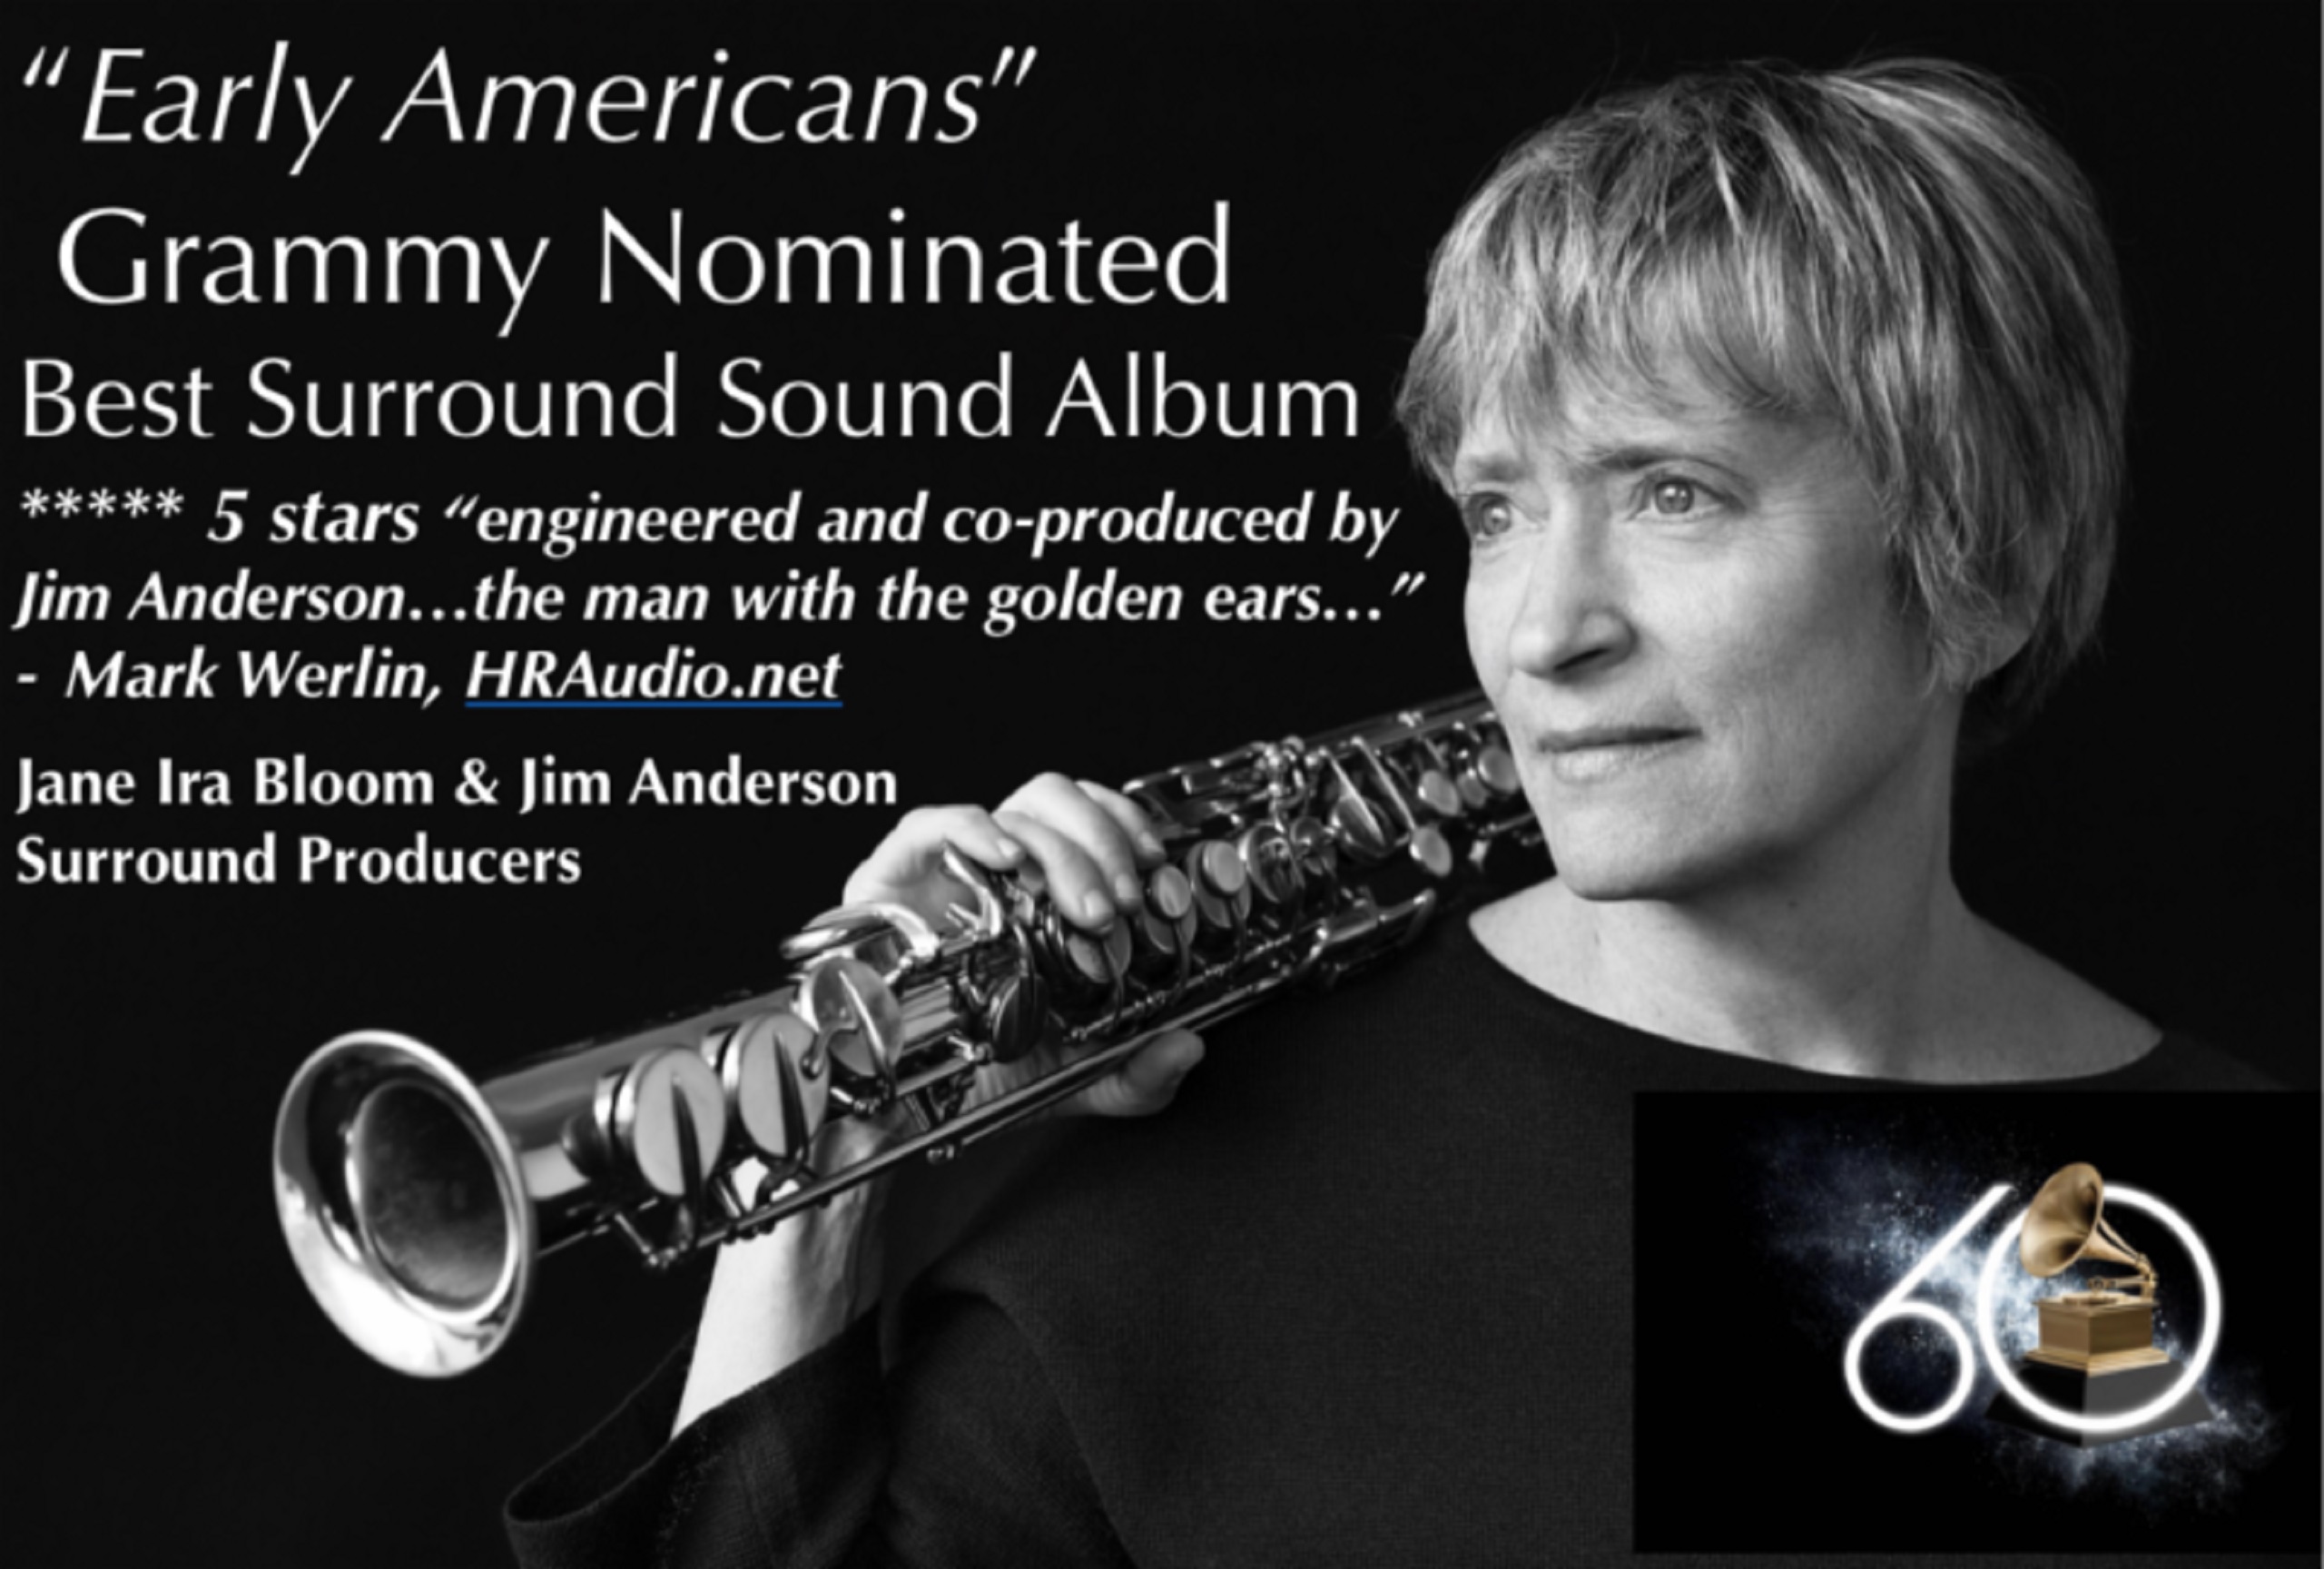 Jane Ira Bloom - Wild Lines & Grammy Nominated Early Americans